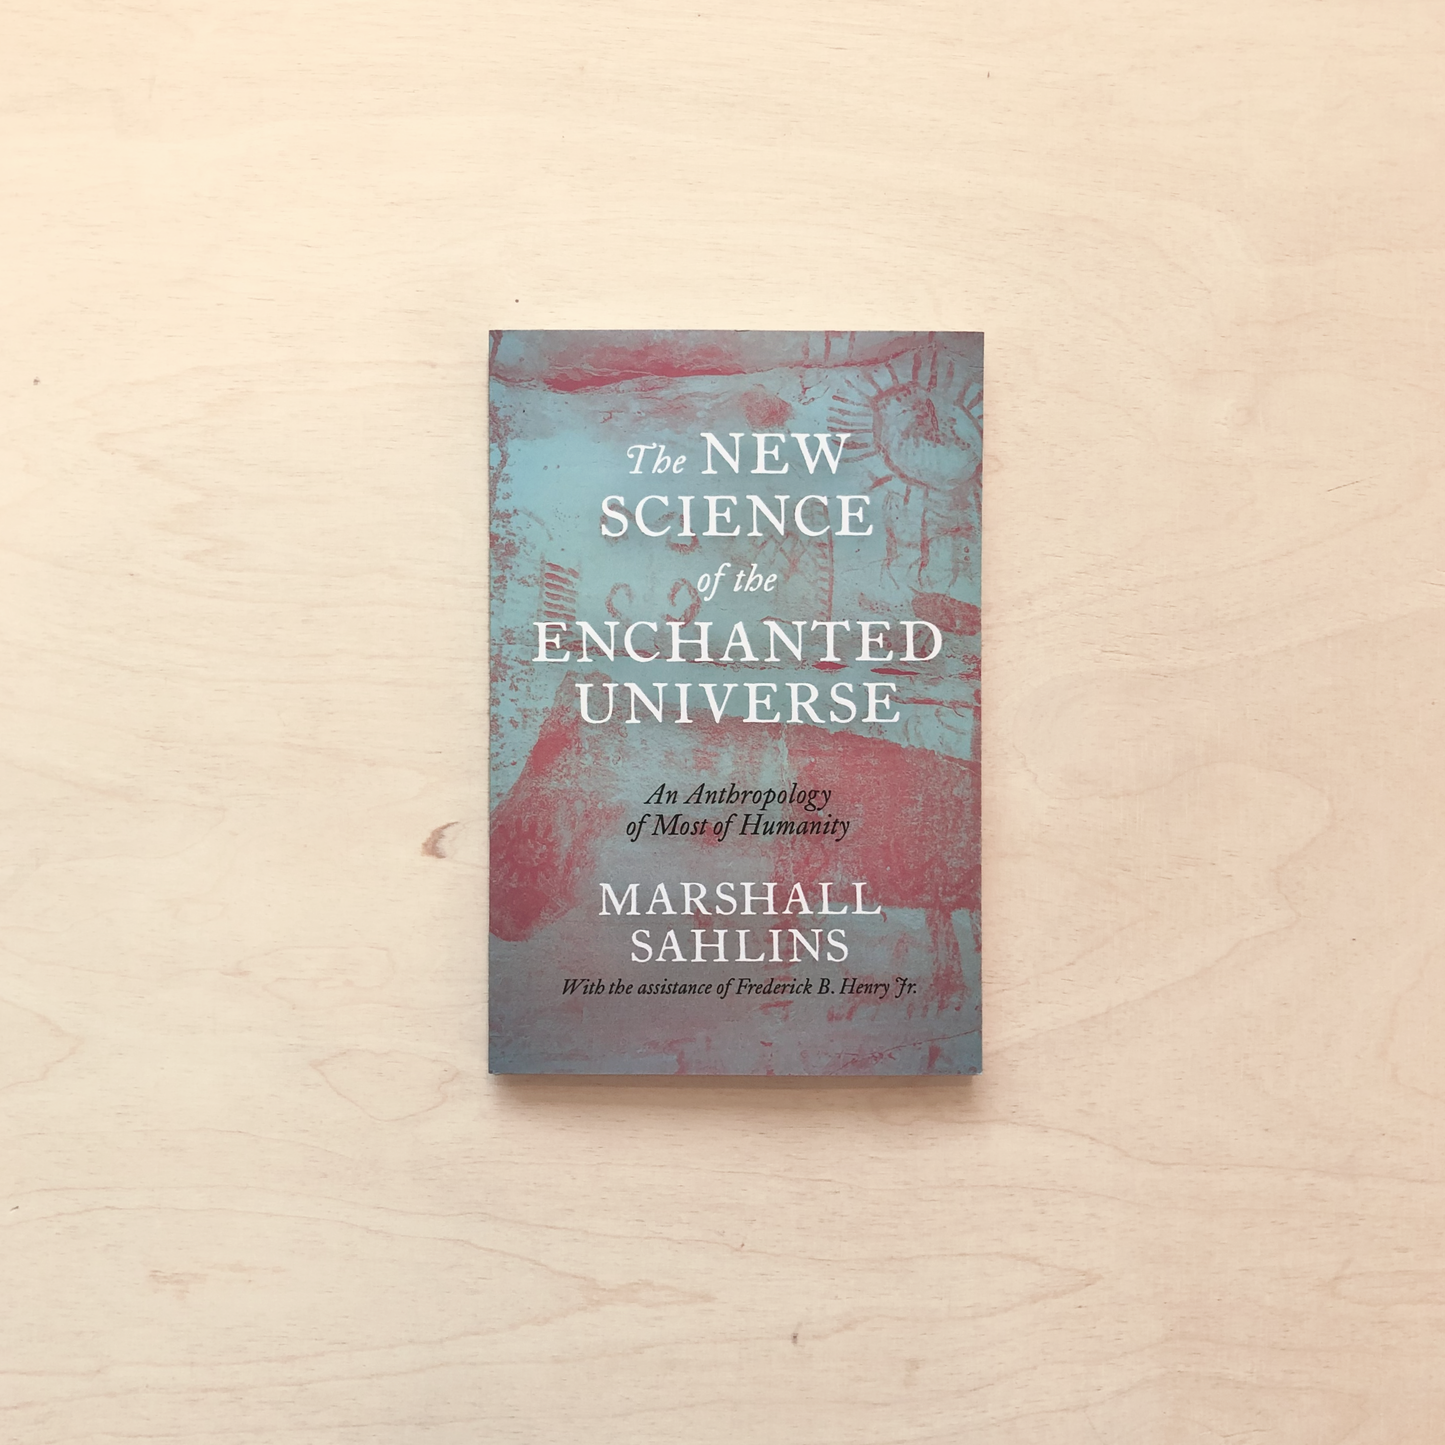 The New Science of the Enchanted Universe : An Anthropology of Most of Humanity